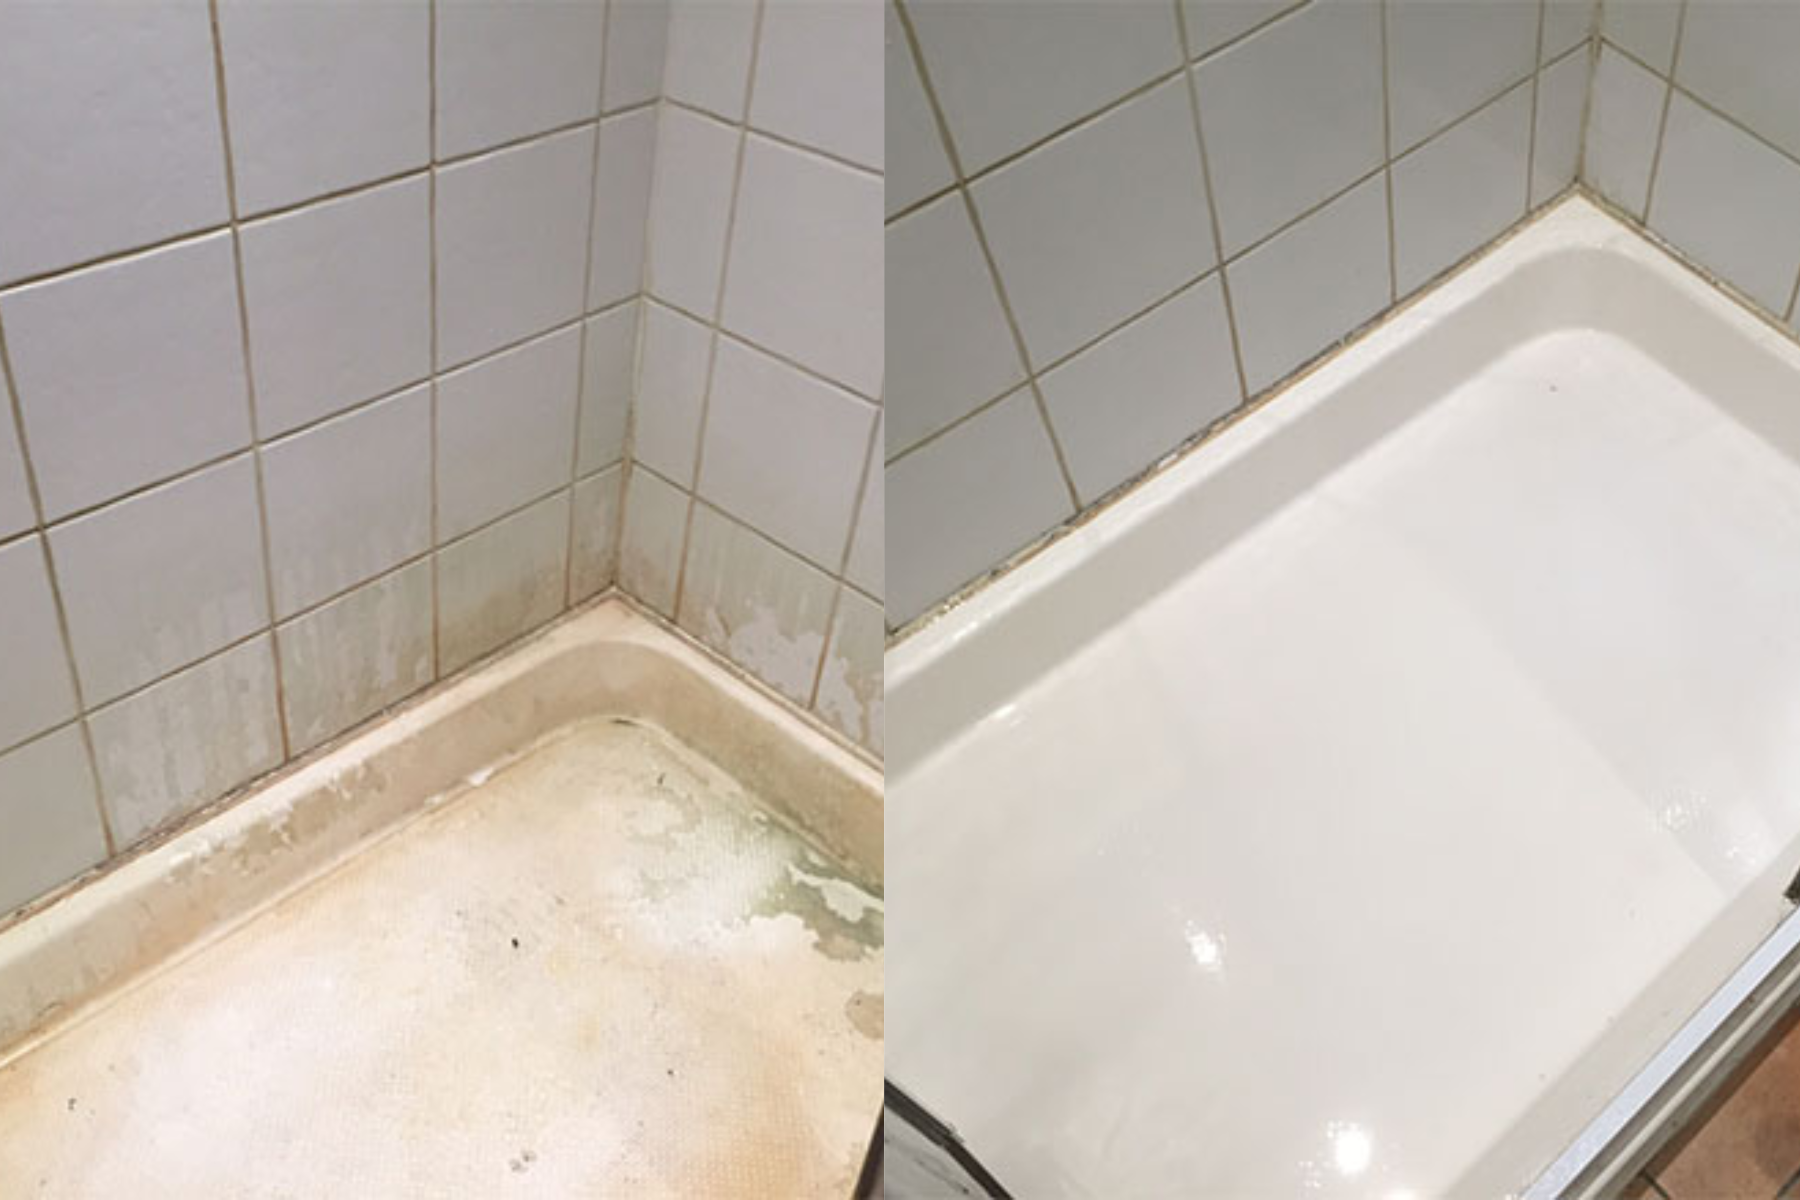 Before And After Limescale Getting Removed From Shower Tray